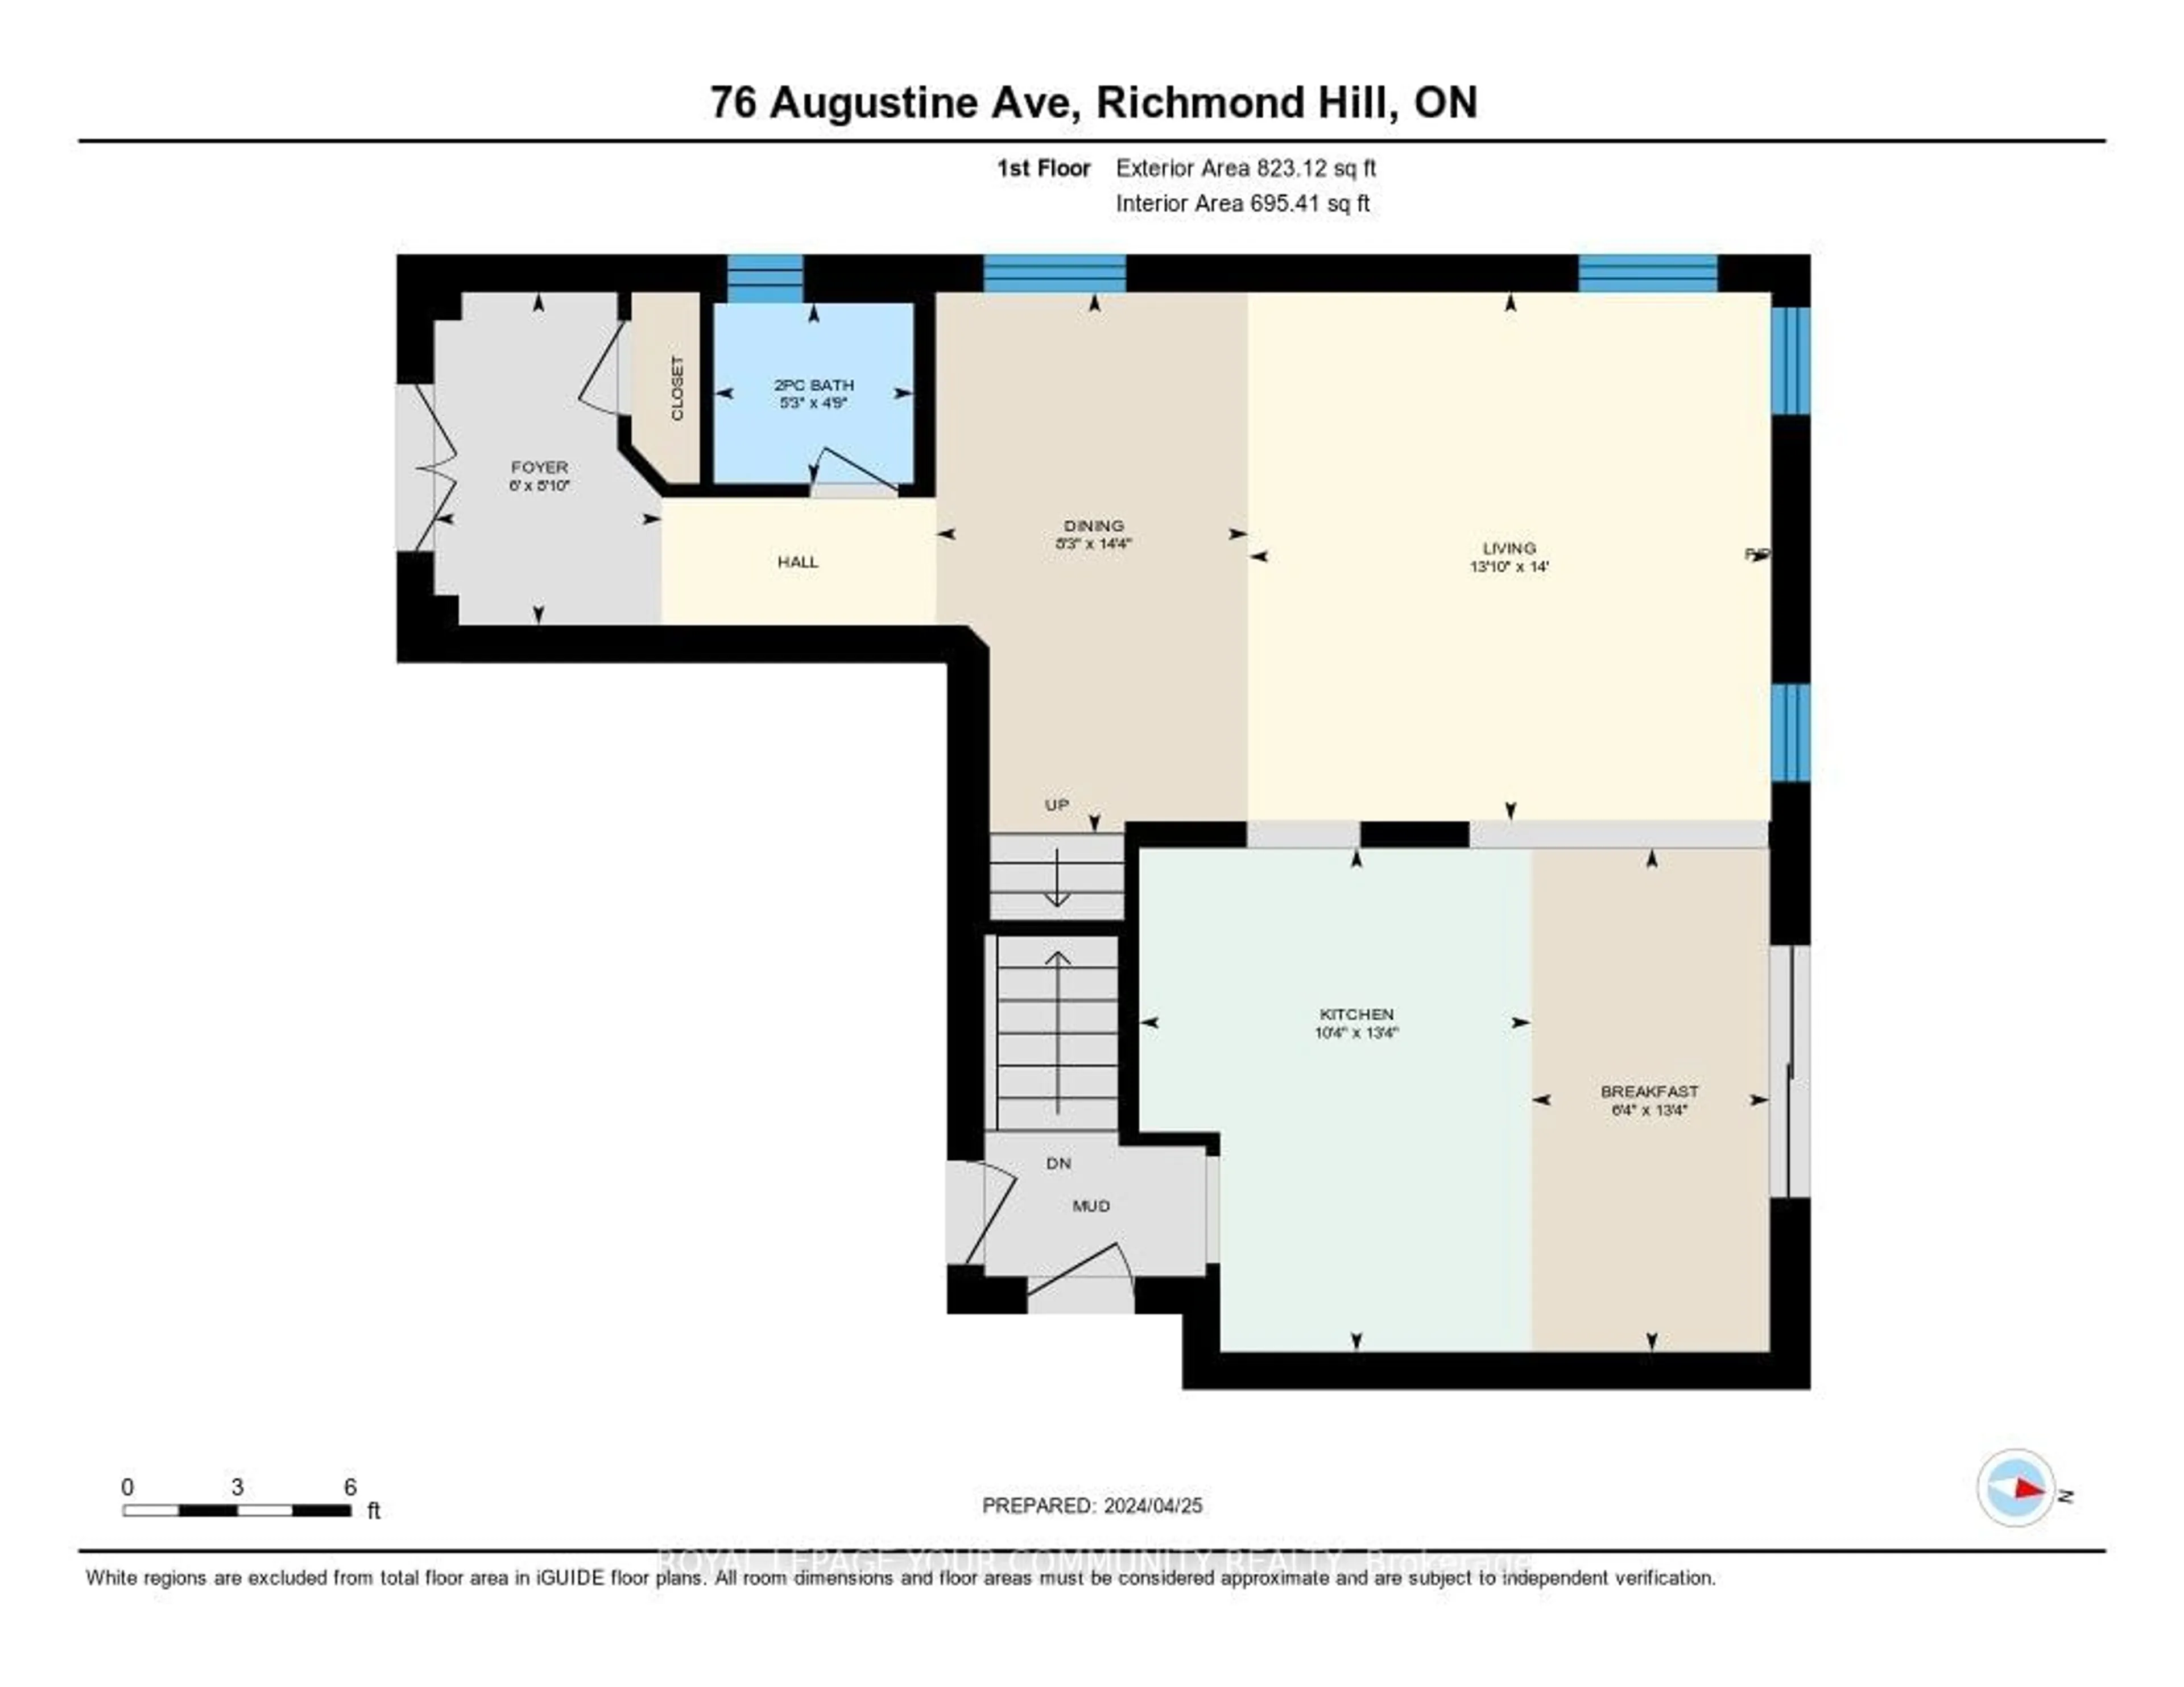 Floor plan for 76 Augustine Ave, Richmond Hill Ontario L4E 0L3